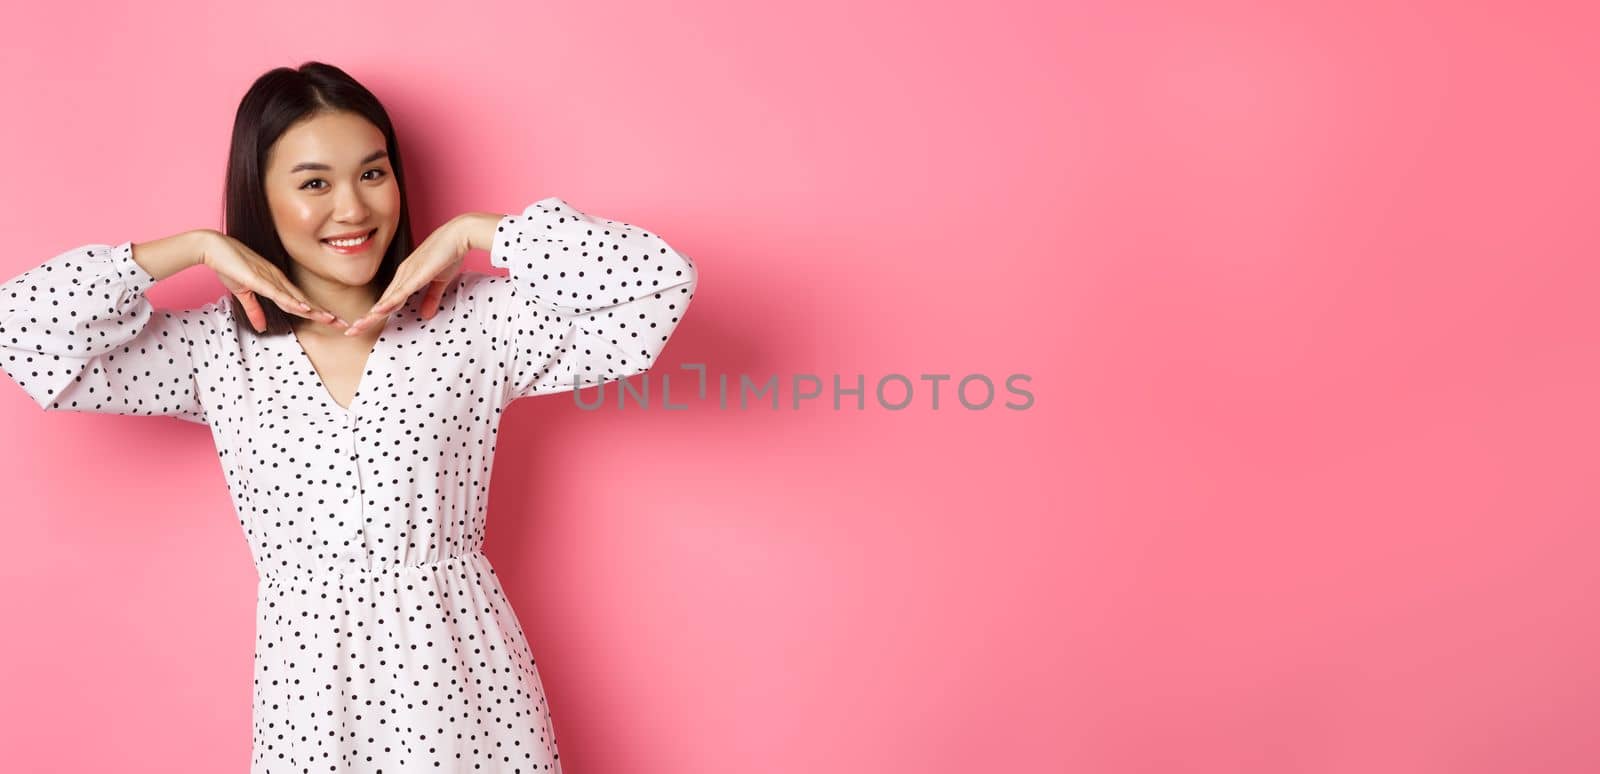 Lovely asian woman showing her beautiful clean face, smiling pretty, standing in dress against pink romantic background.